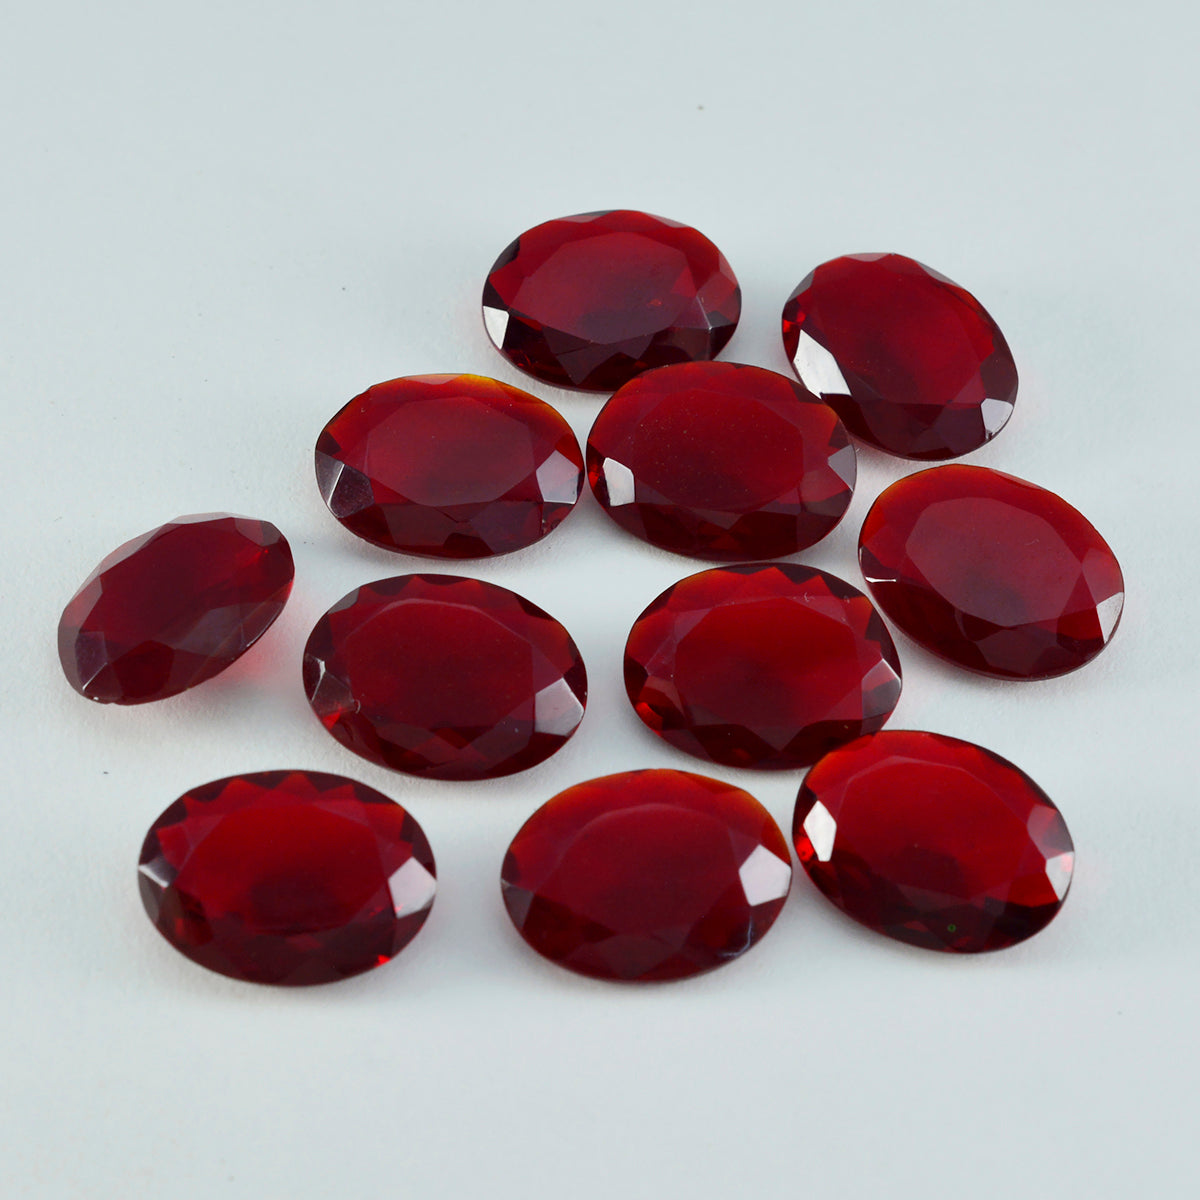 Riyogems 1PC Red Ruby CZ Faceted 10x14 mm Oval Shape startling Quality Loose Stone